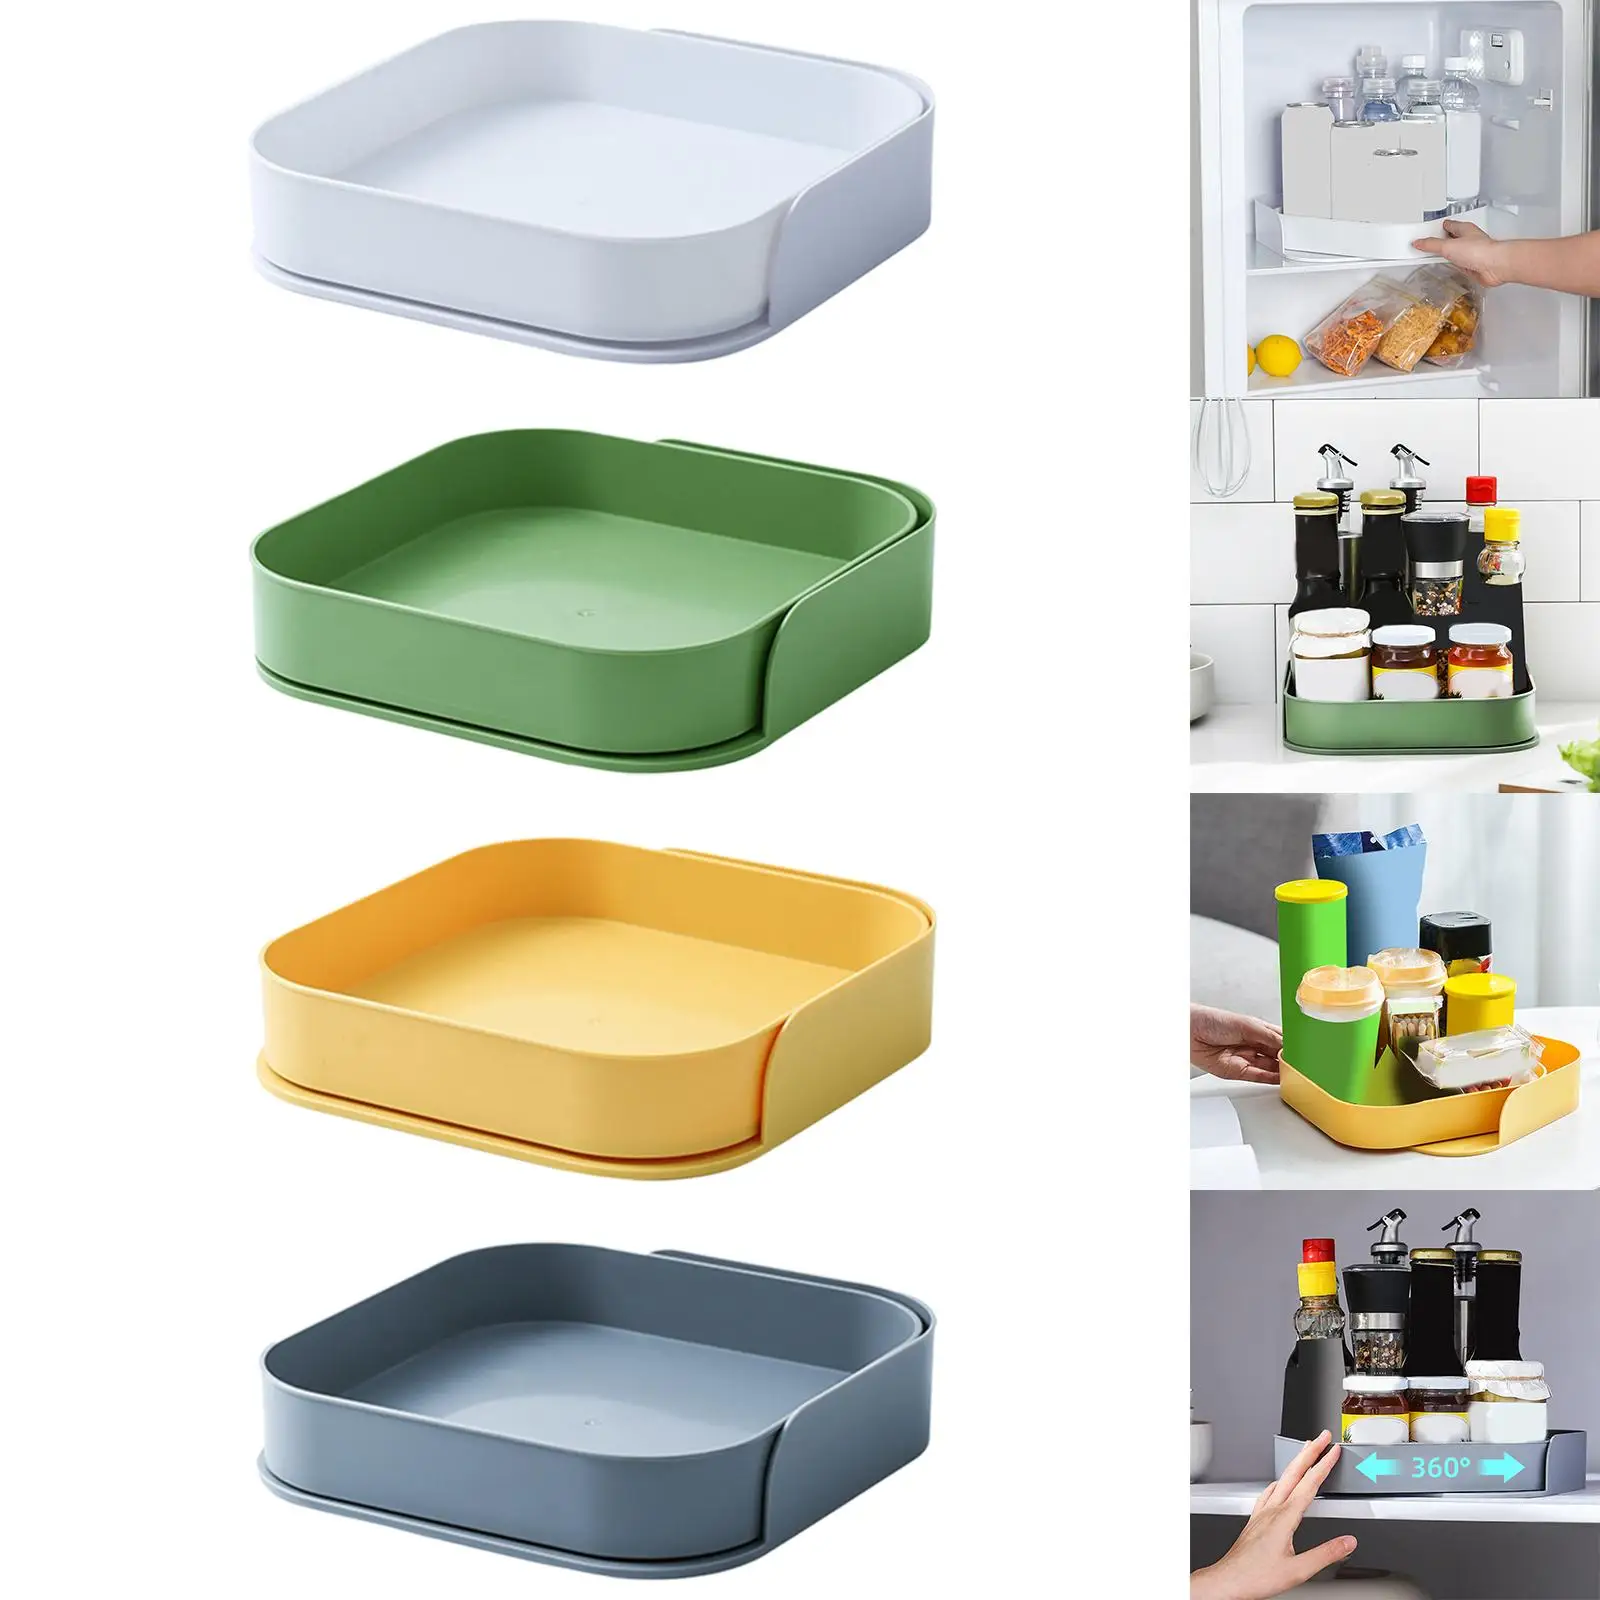 360 Rotation Storage Rack Food Fruit Serving Tray Multifunction for Kitchen